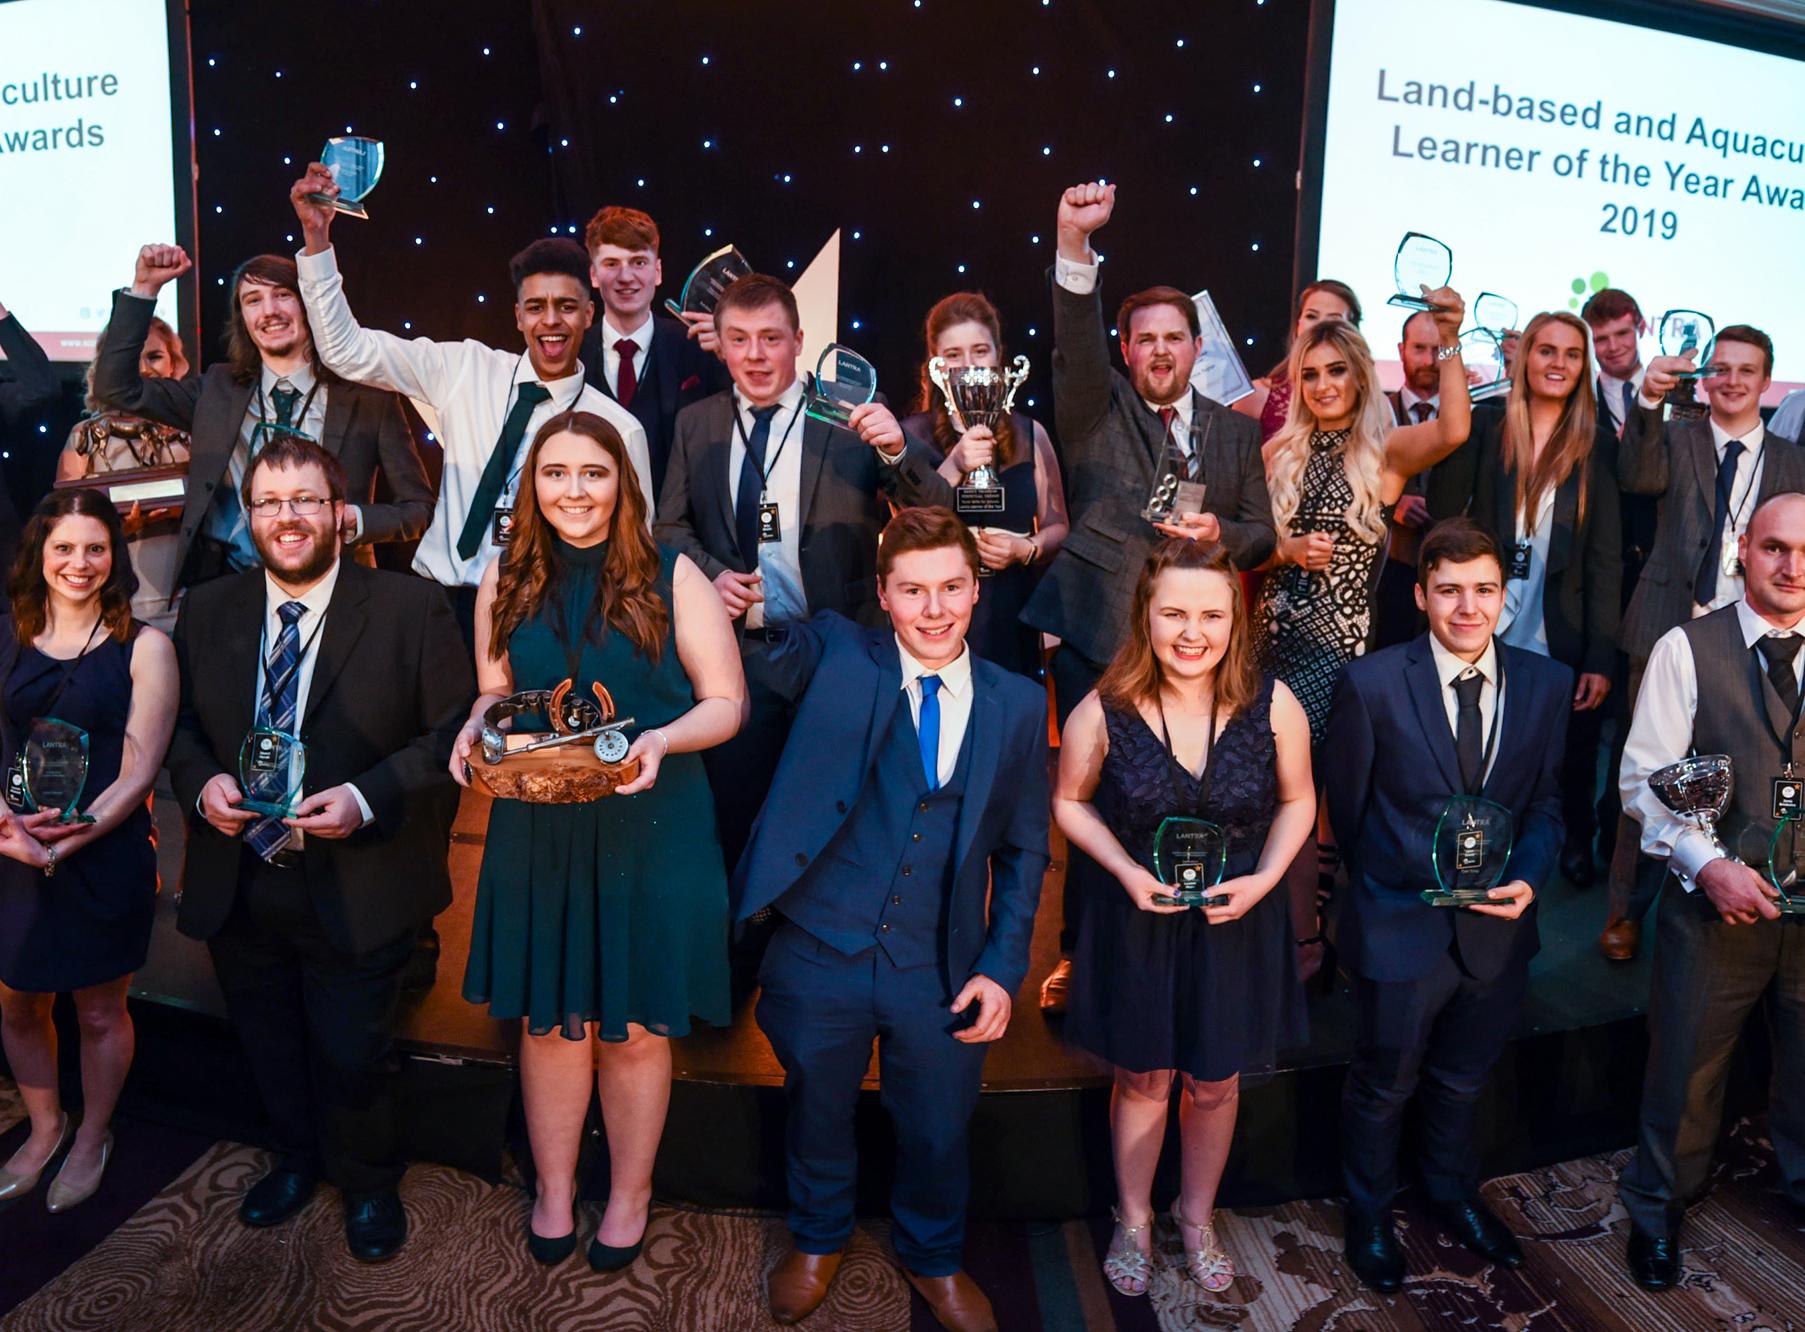 Winners celebrated at Lantra Scotland’s Learner of the Year Awards